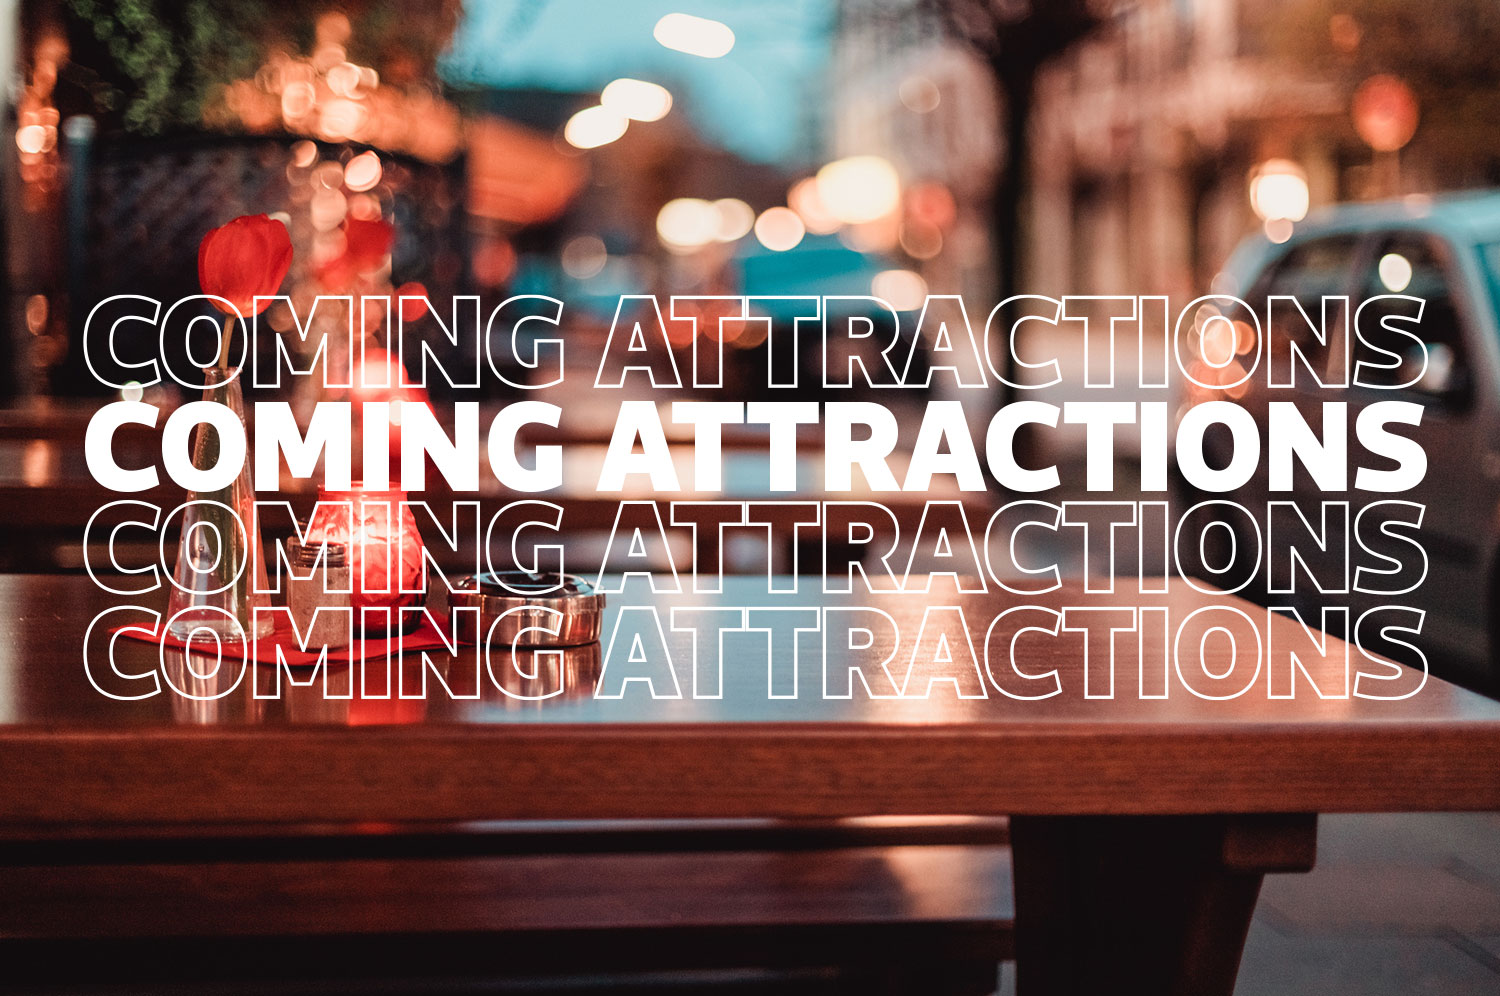 City lights shine in the evening background and a wooden picnic style table sits in the foreground. White text ripples down the page reading, “Coming Attractions.”